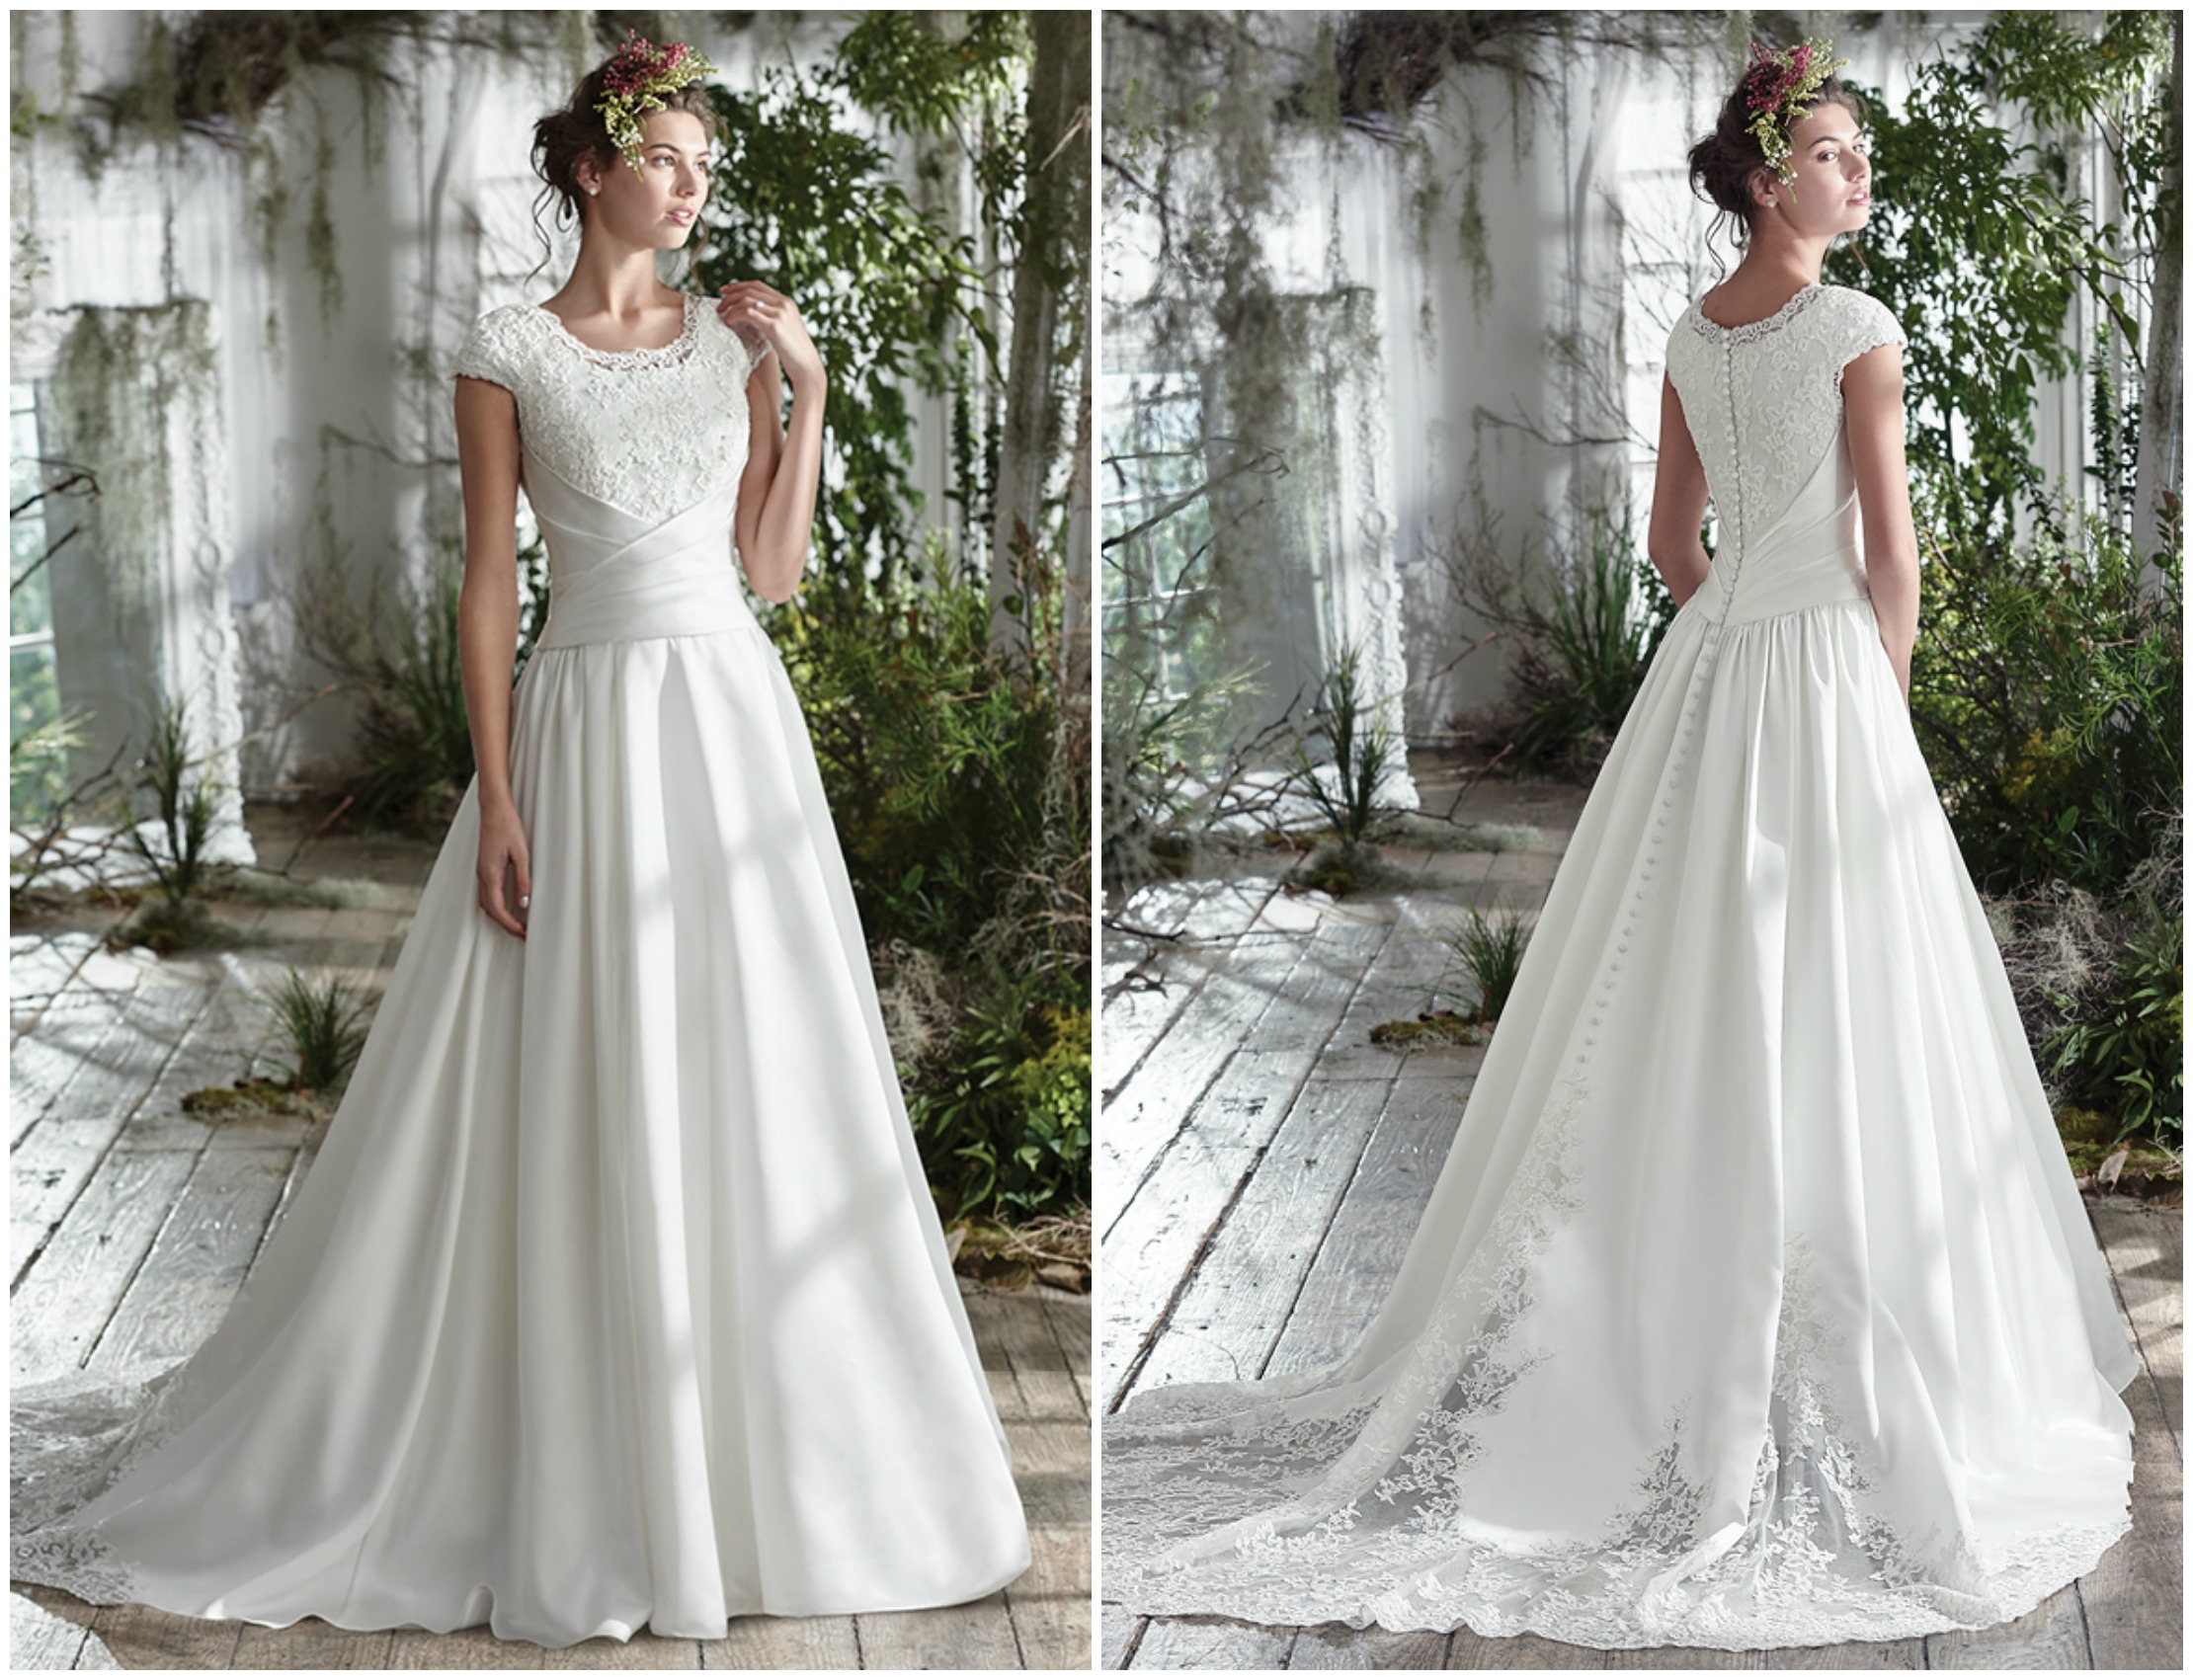 Exquisite details elevate this timeless cap-sleeve A-Line wedding dress, featuring a fitted lace bodice, asymmetrically cinched waist, and pleated Roma satin skirt. Artfully placed illusion lace embroidery accentuate the voluminous train and soft scoop neckline. Finished with covered buttons over zipper and inner elastic closure.

<a href="https://www.maggiesottero.com/maggie-sottero/jill/9771" target="_blank">Maggie Sottero</a>